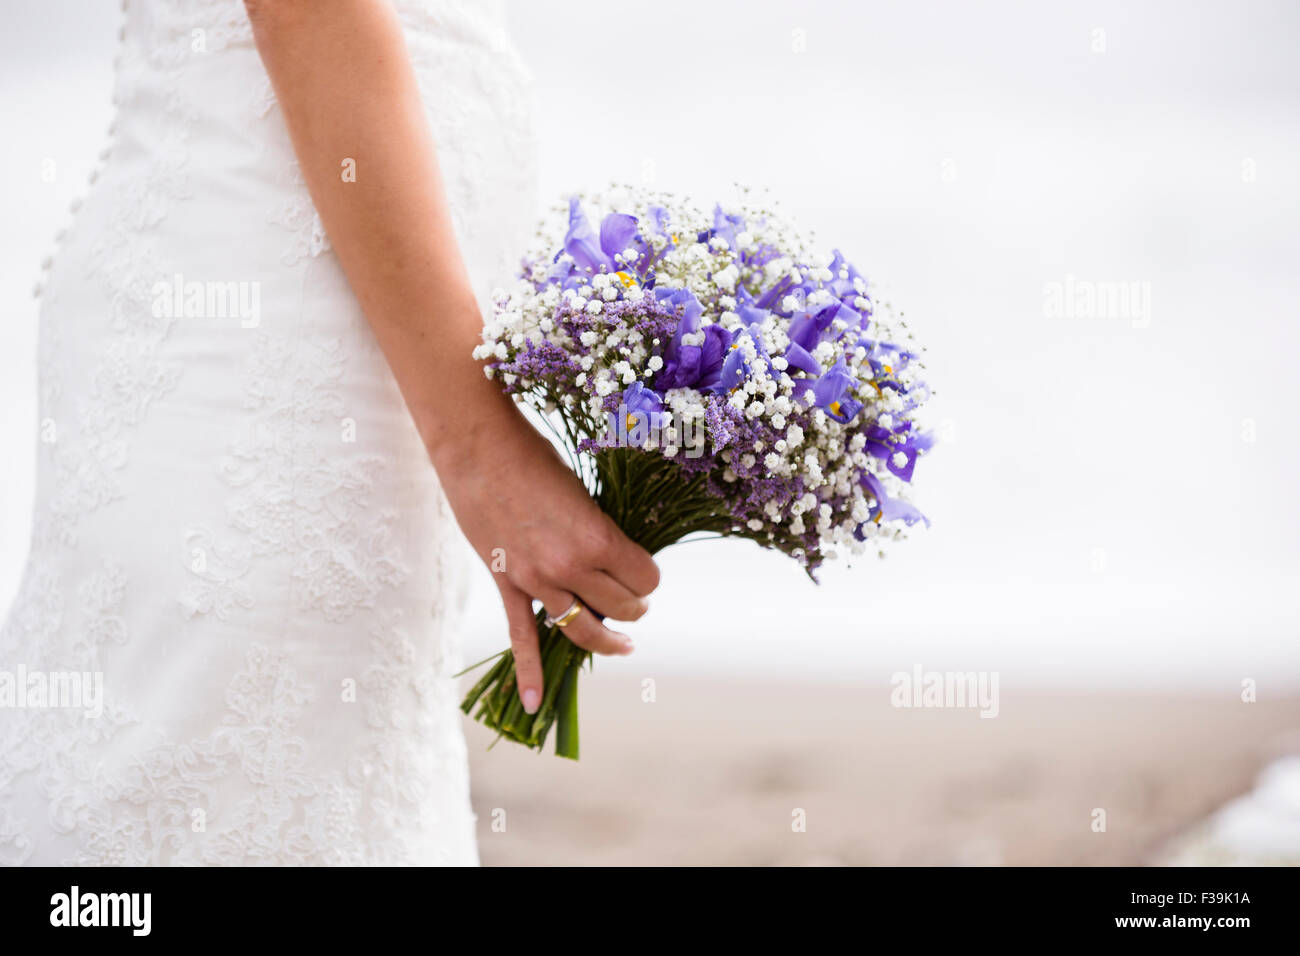 Close-up of a bride holding a bouquet of flowers Banque D'Images